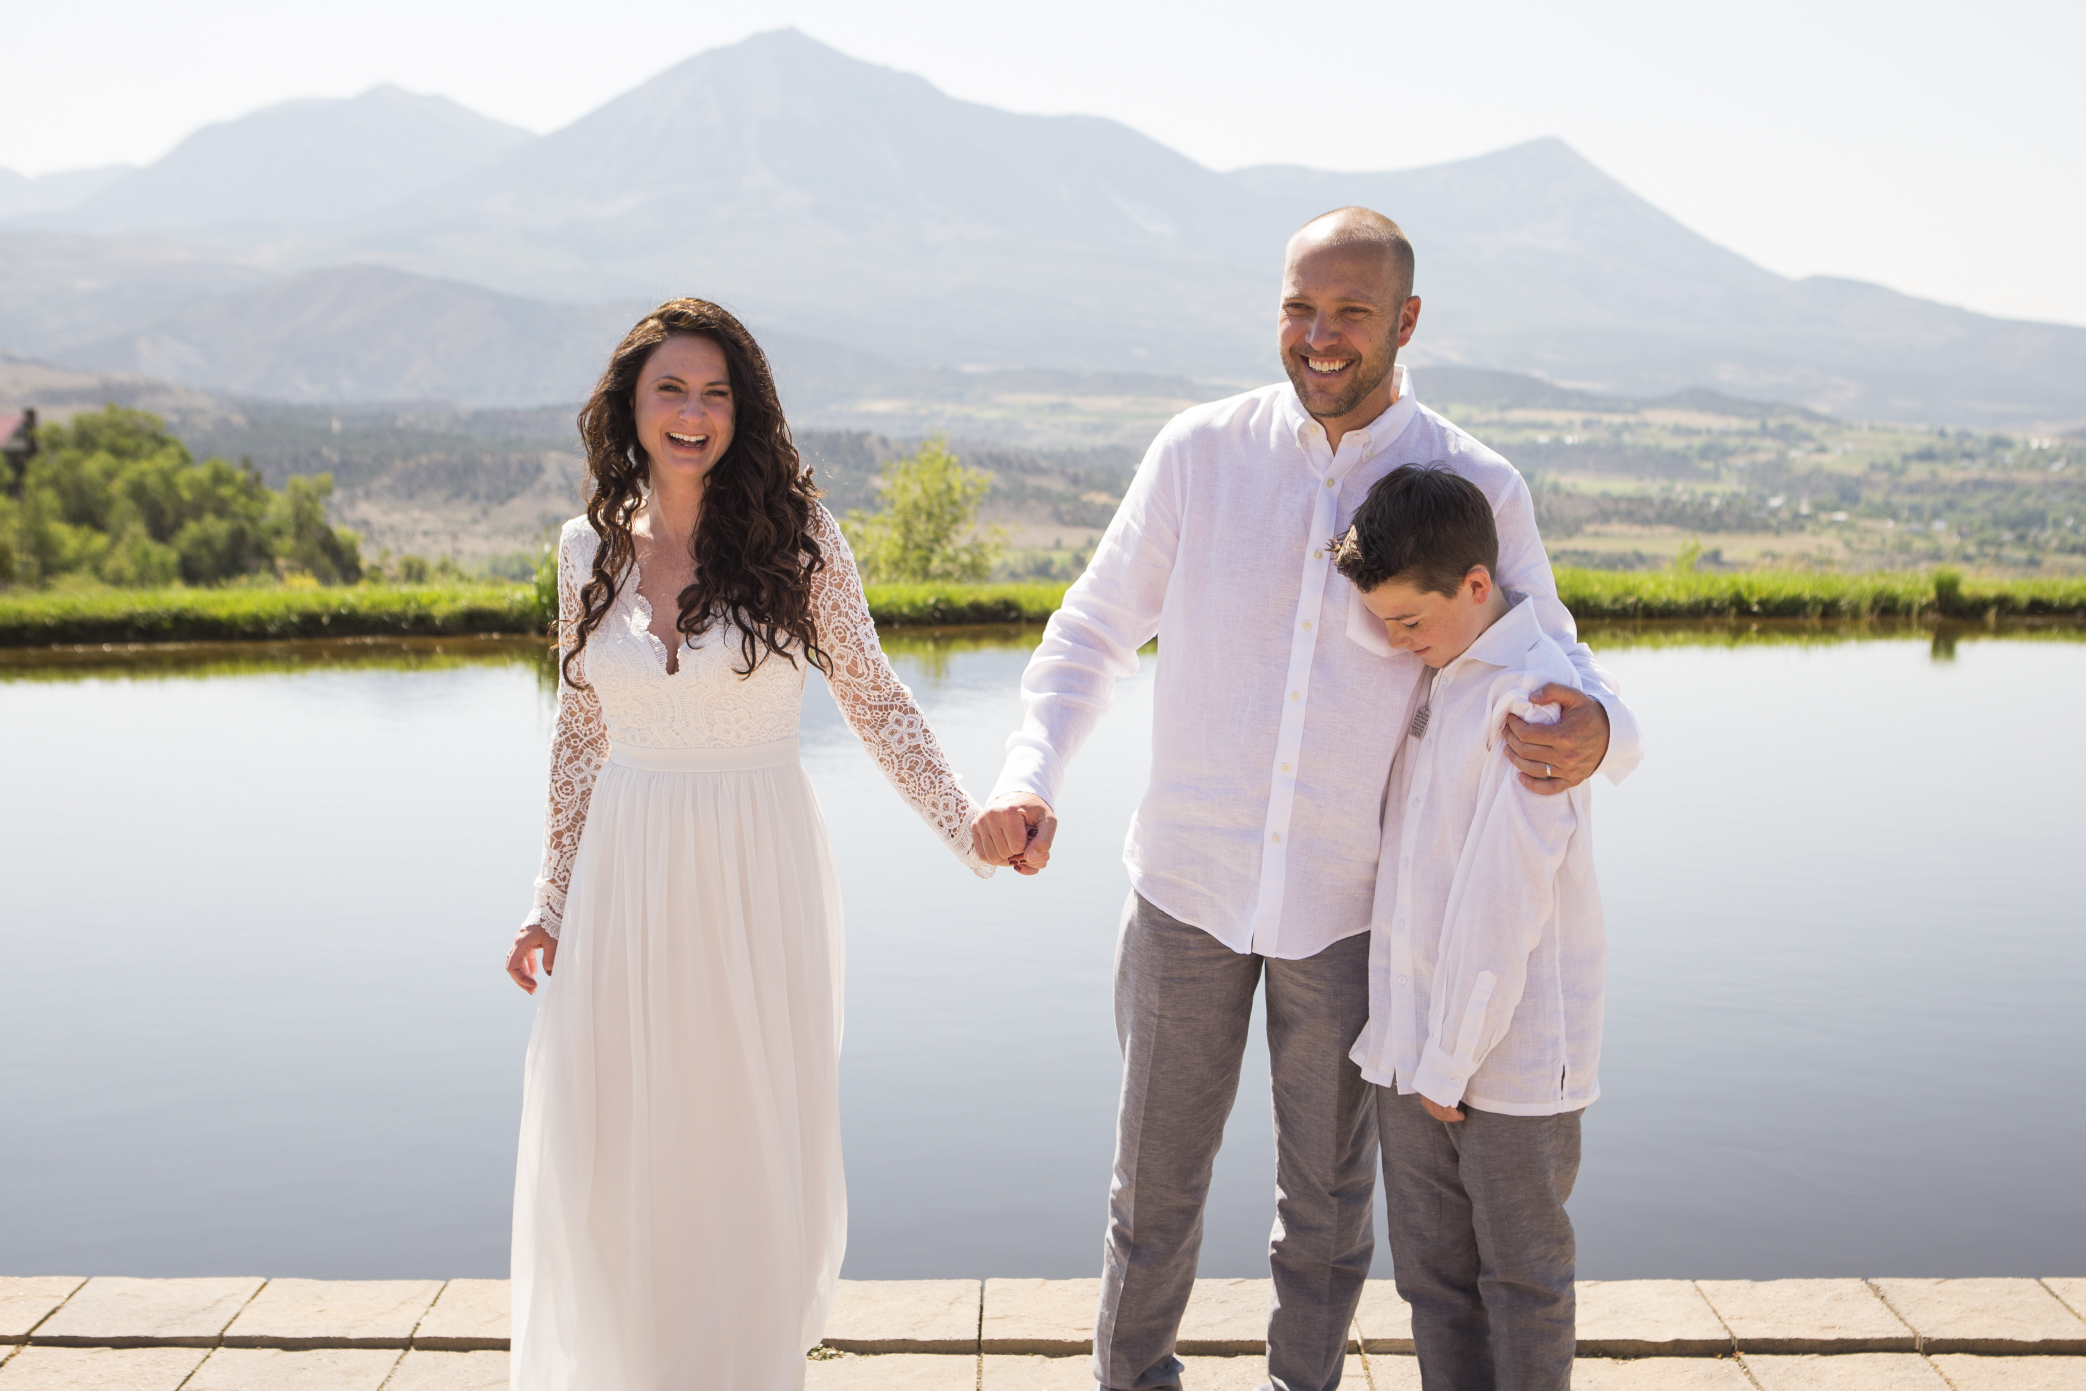 Wedding Photographer in Paonia CO | Windfirm Photography